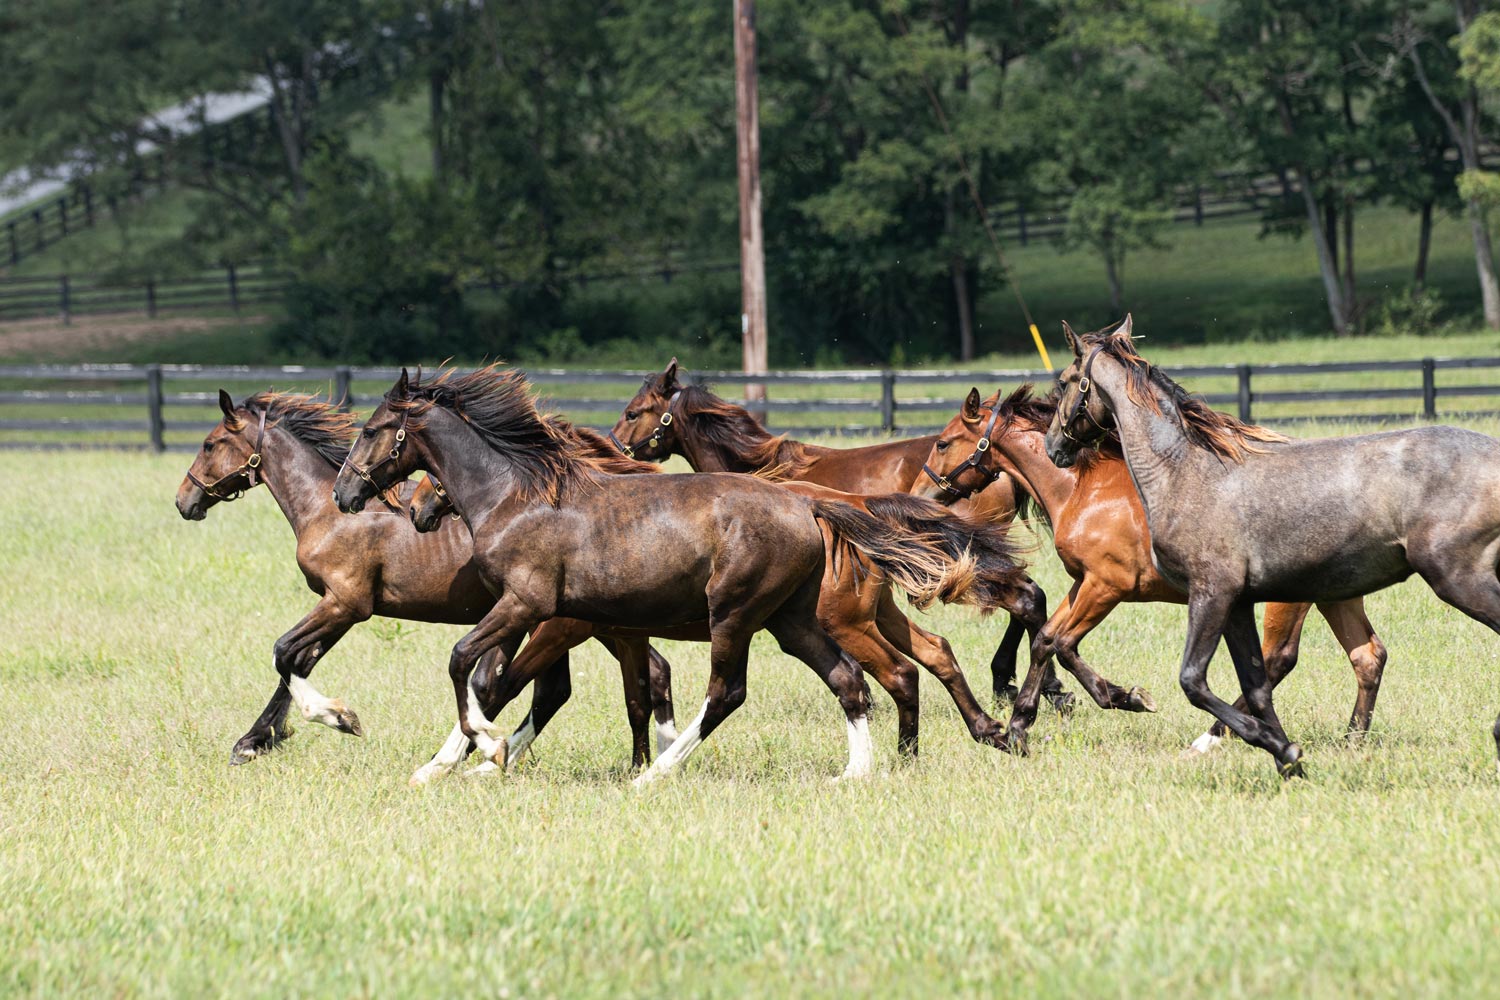 horses galloping in a grassy field